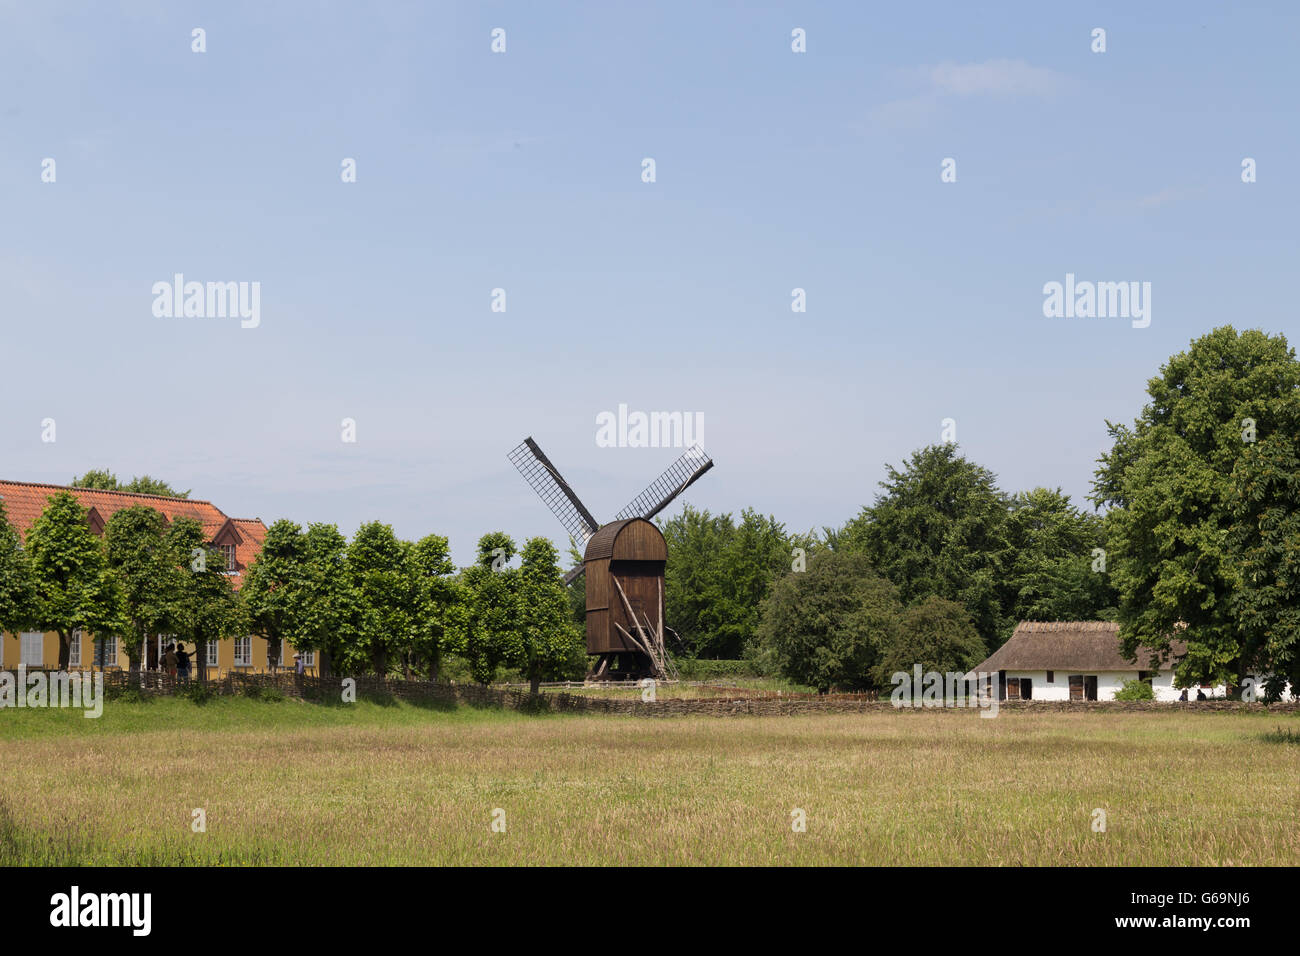 Lyngby, Denmark - June 23, 2016: A historic windmill in the Frilands Museum. Stock Photo